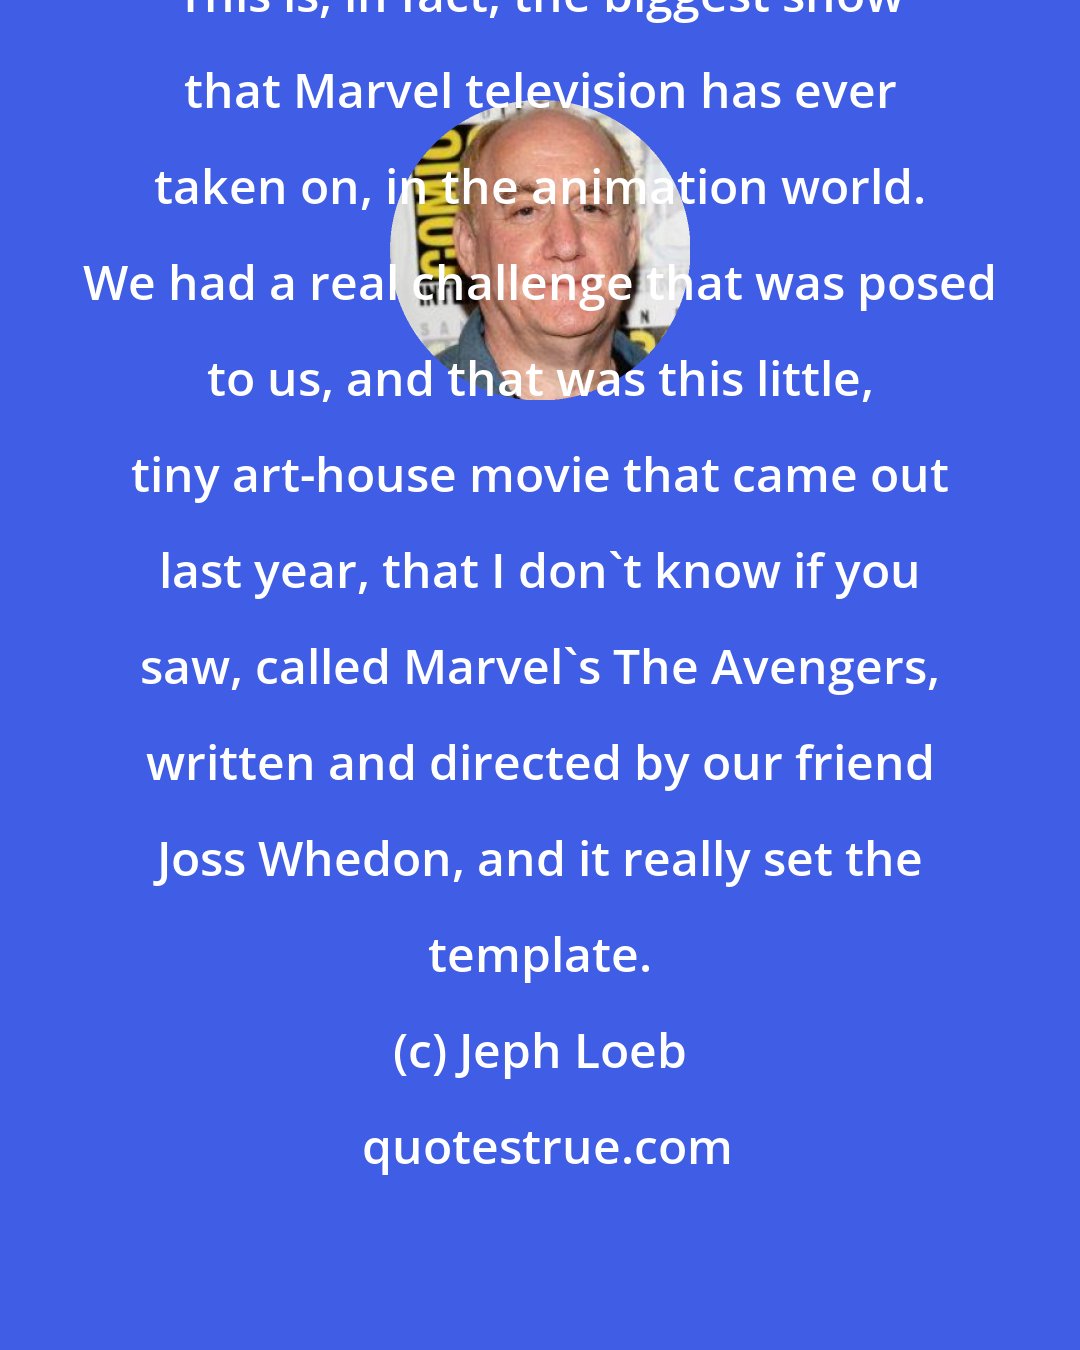 Jeph Loeb: This is, in fact, the biggest show that Marvel television has ever taken on, in the animation world. We had a real challenge that was posed to us, and that was this little, tiny art-house movie that came out last year, that I don't know if you saw, called Marvel's The Avengers, written and directed by our friend Joss Whedon, and it really set the template.